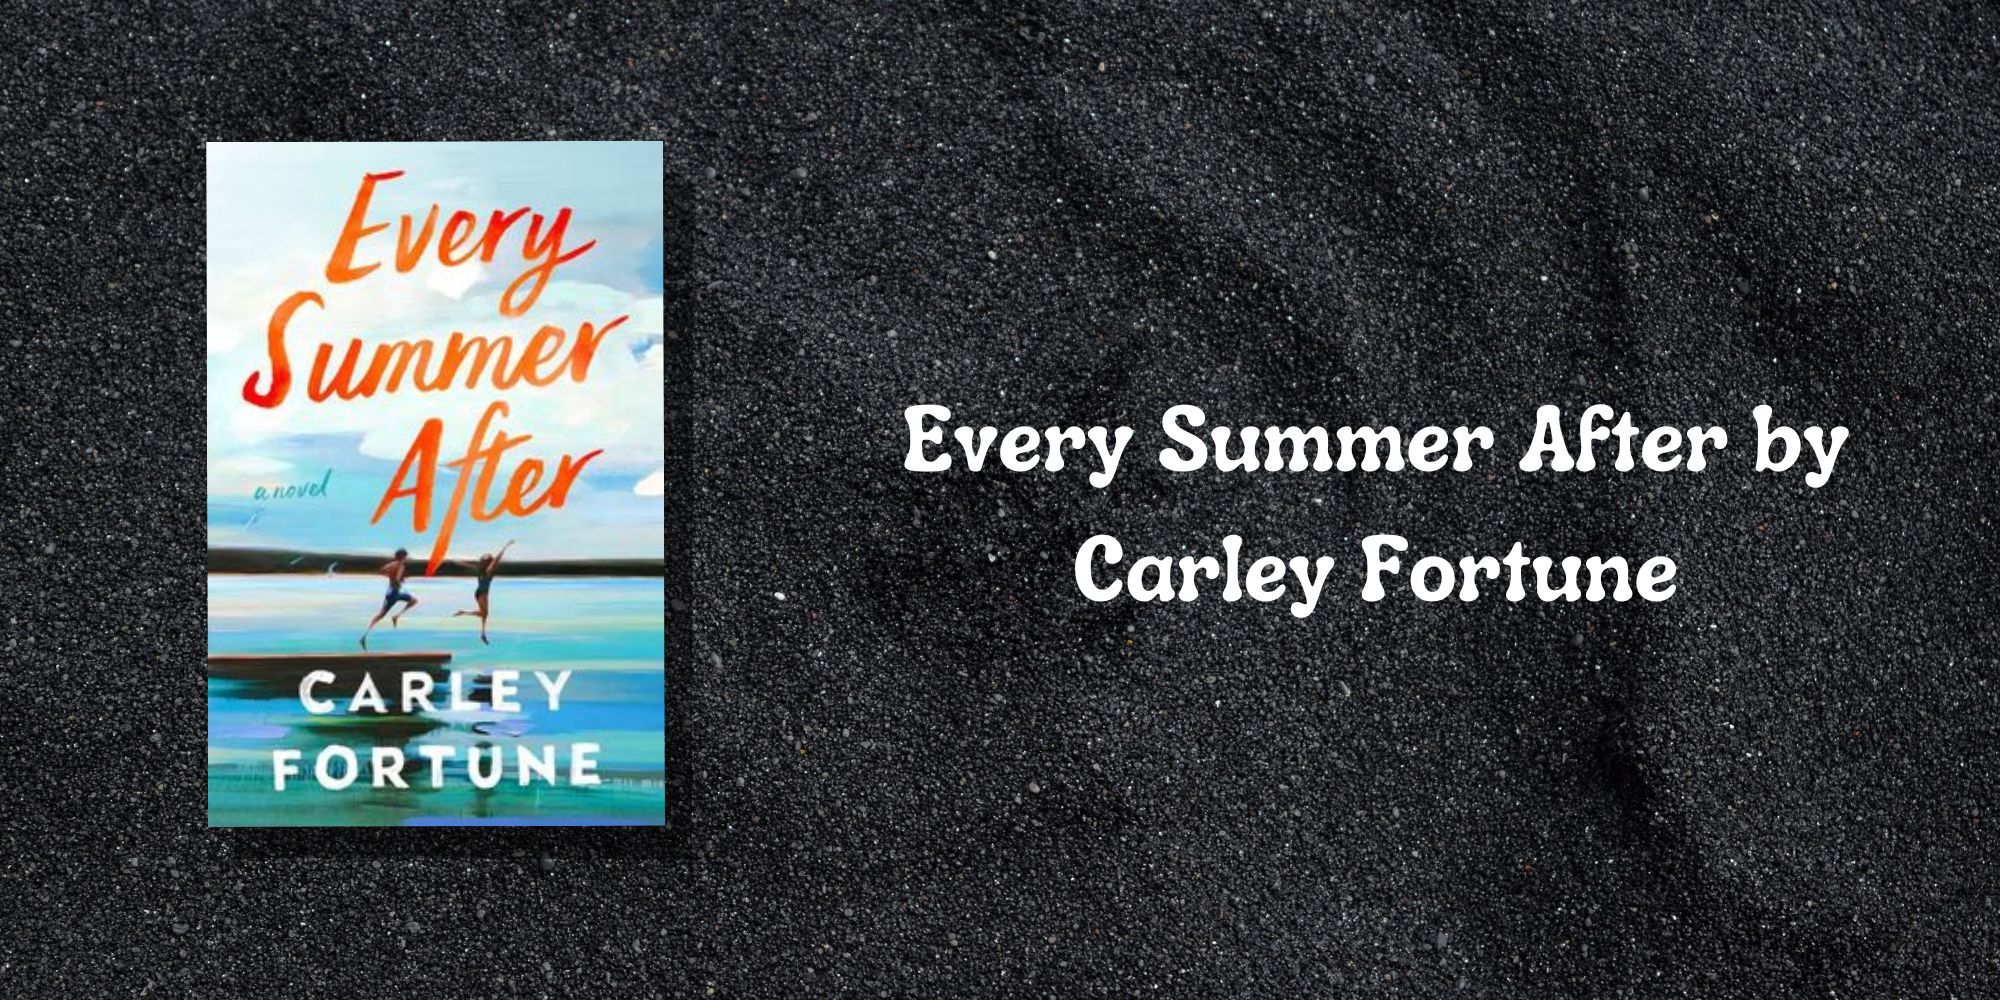 The cover of Every Summer After by Carley Fortune